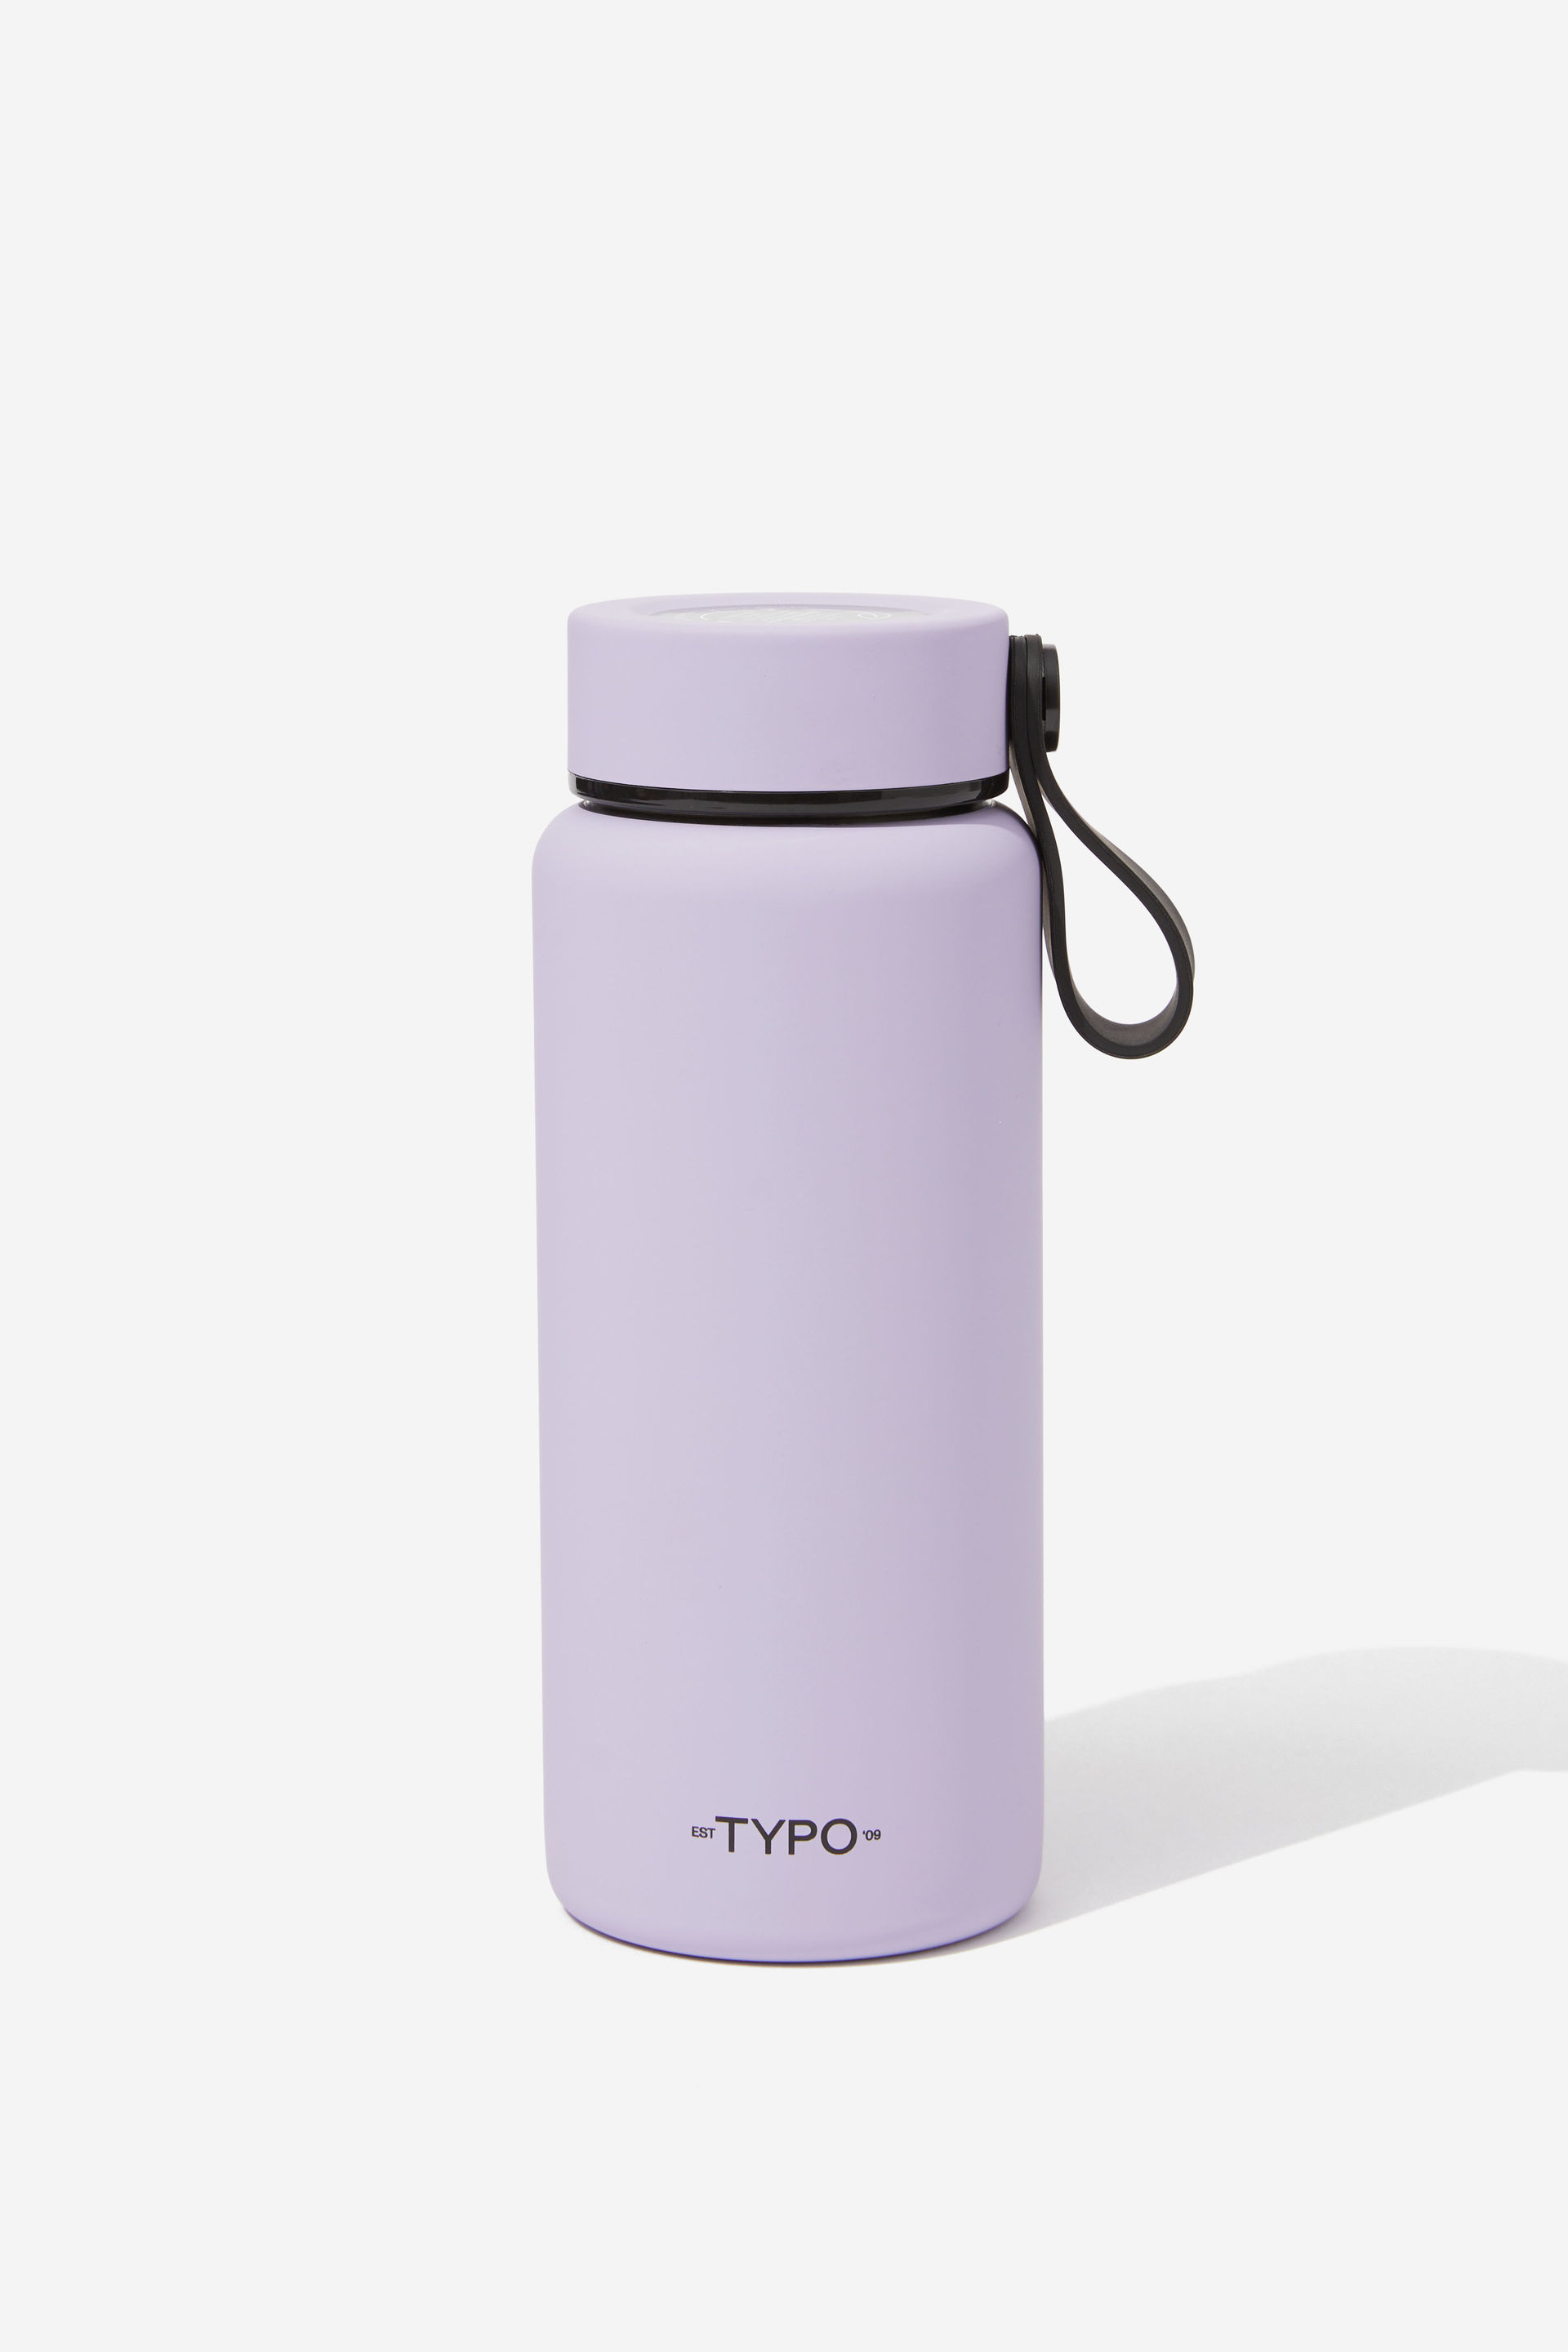 Typo - On The Move Drink Bottle 350ML 2.0 - Soft lilac